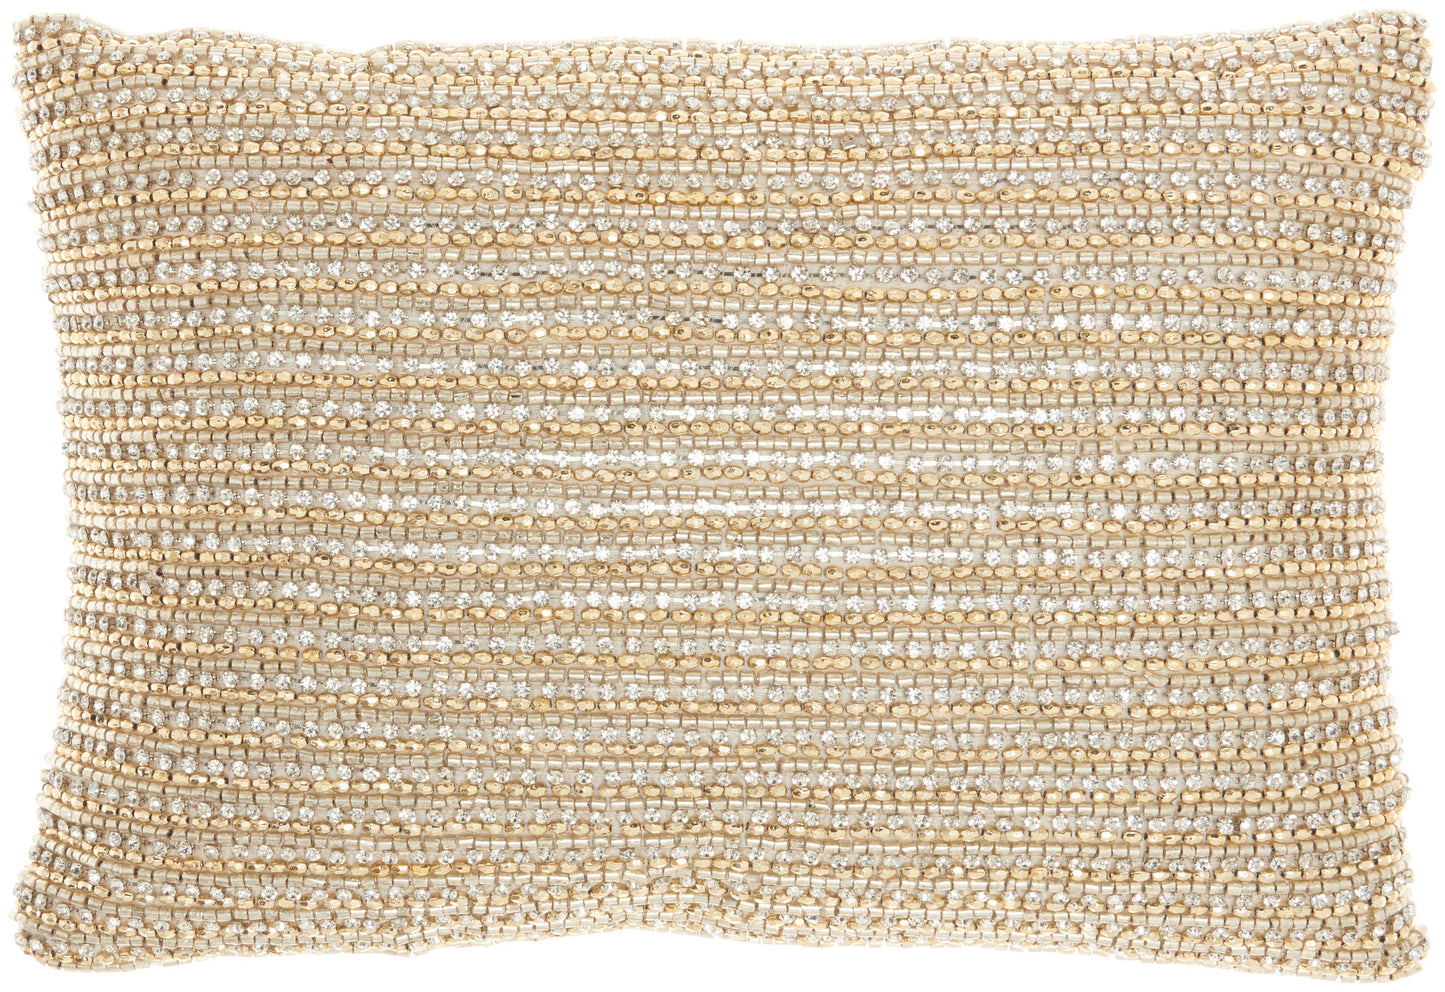 Luminescence Z0735 Cotton Beaded Horiz Stripes Throw Pillow From Mina Victory By Nourison Rugs